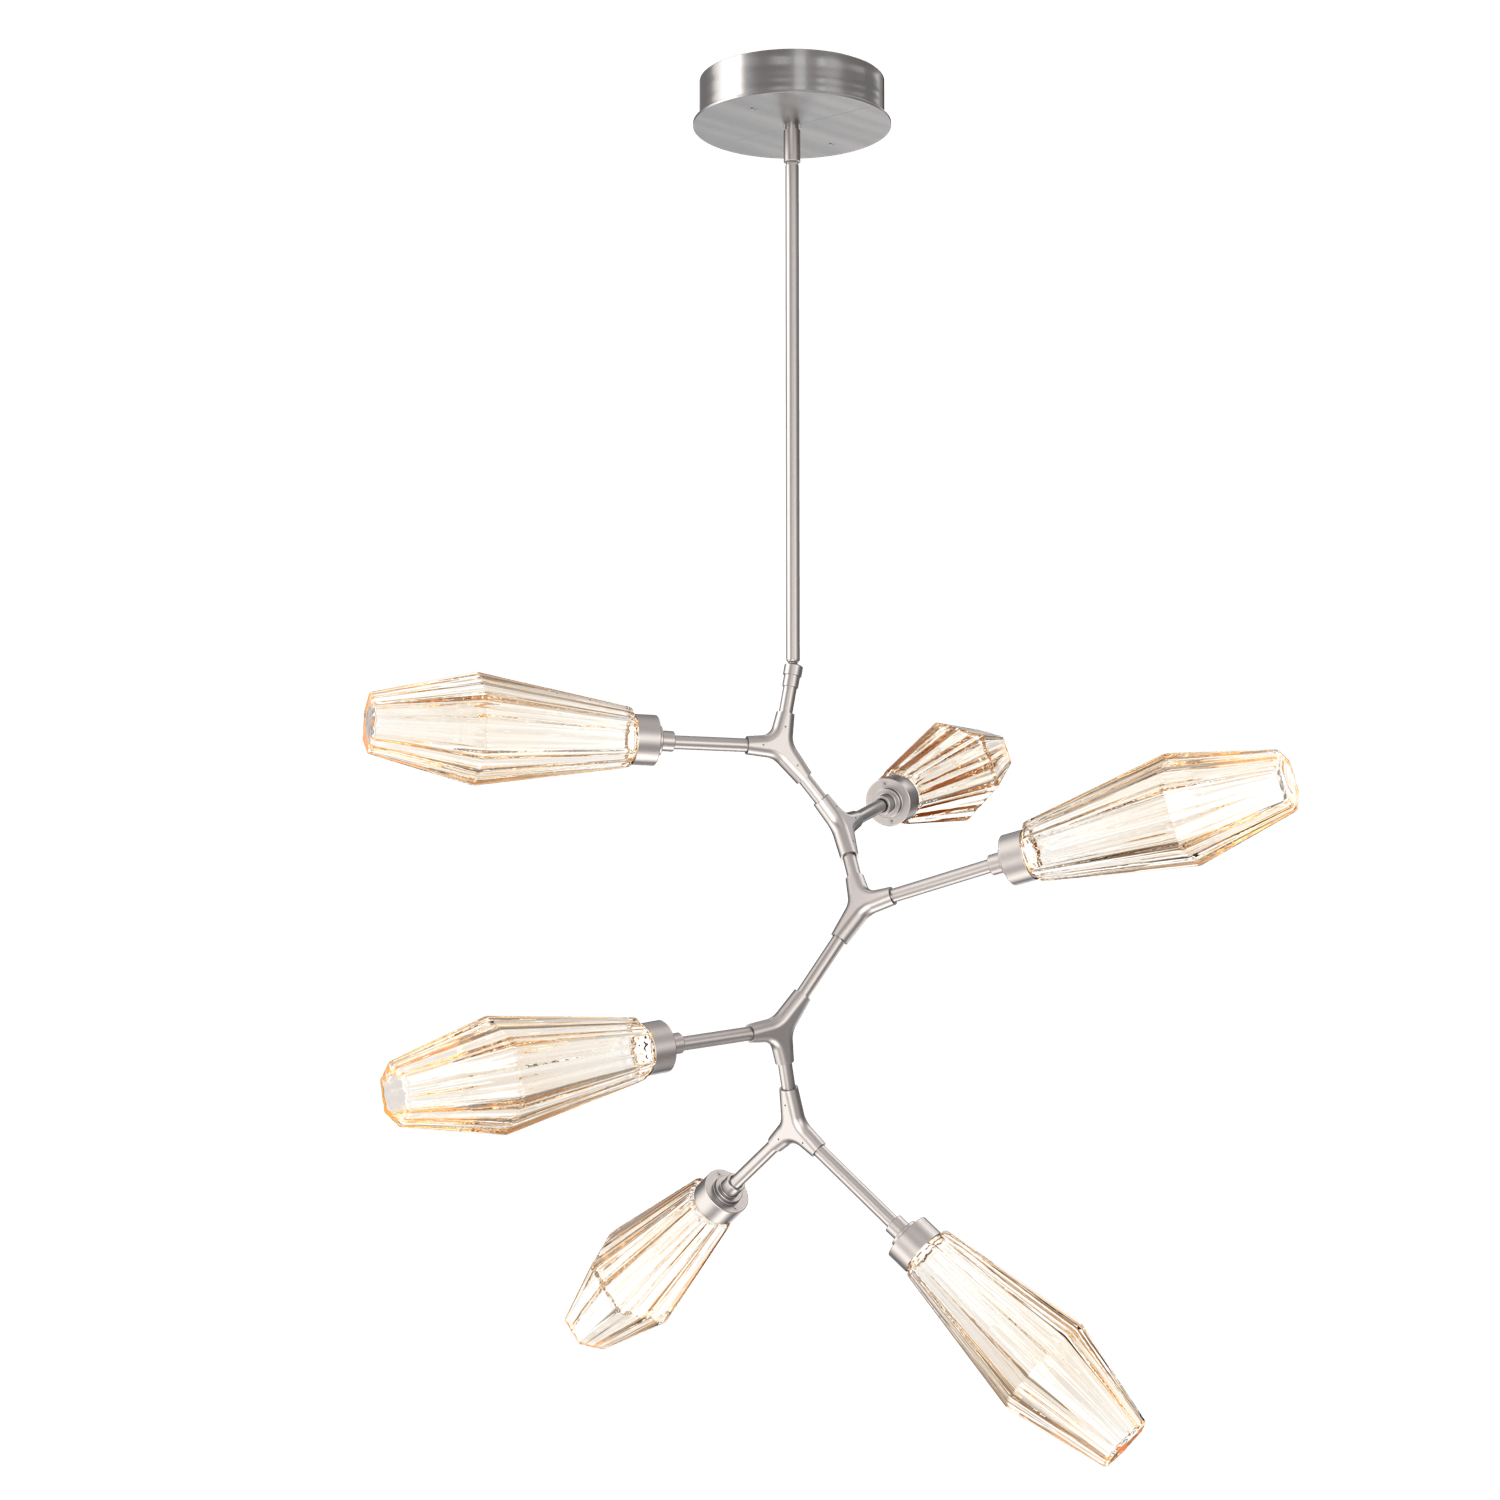 CHB0049-VA-SN-RA-Hammerton-Studio-Aalto-6-light-modern-vine-chandelier-with-satin-nickel-finish-and-optic-ribbed-amber-glass-shades-and-LED-lamping